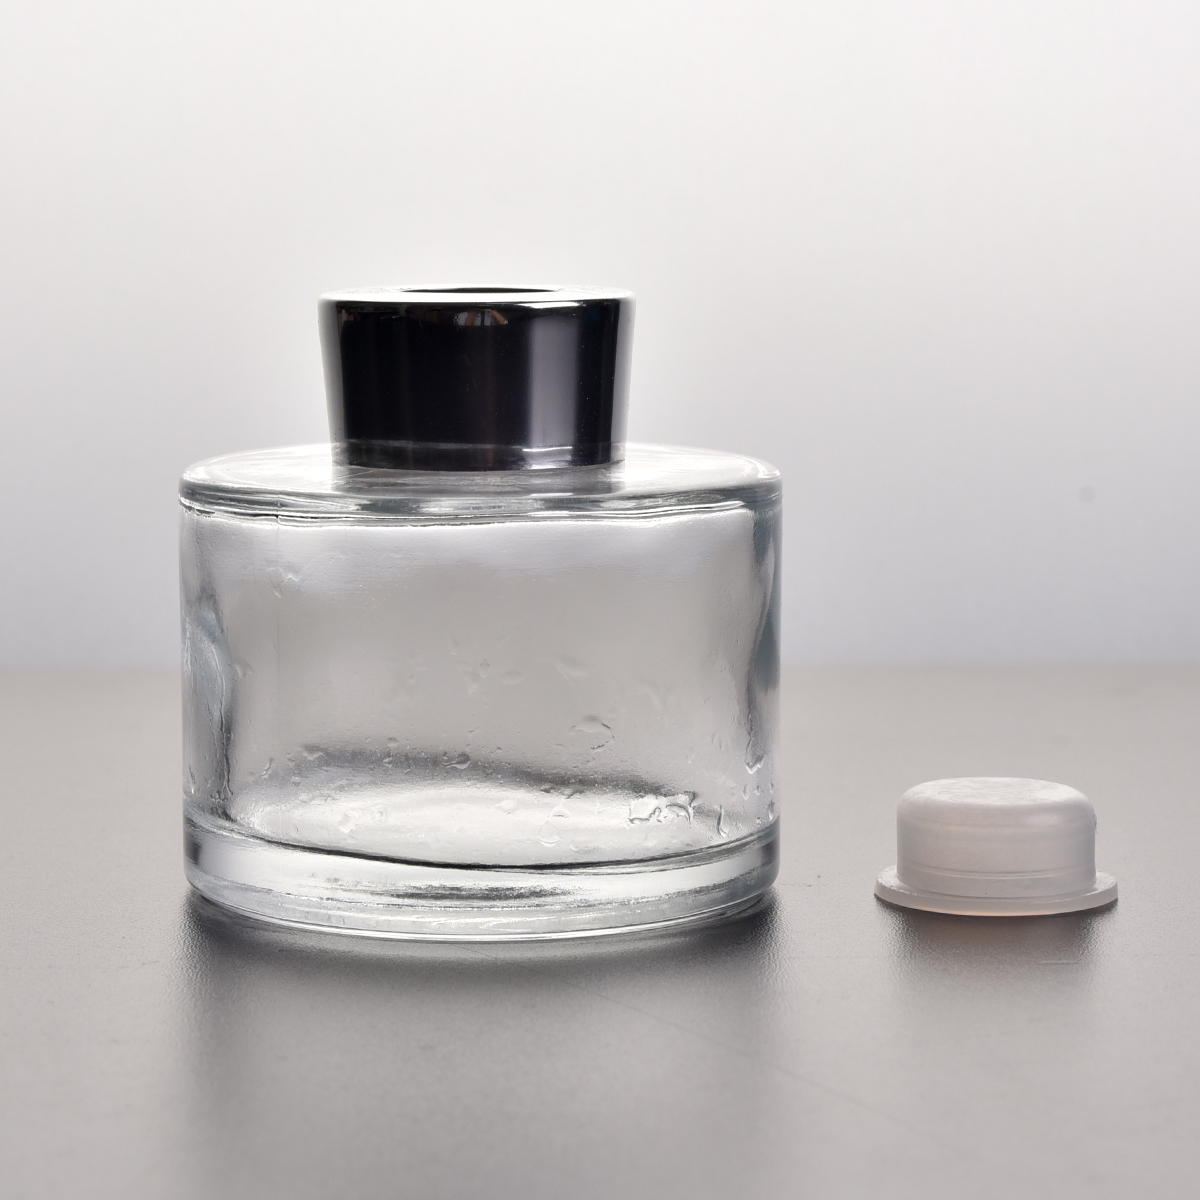 120ml stock diffuser bottle with cap and stopper